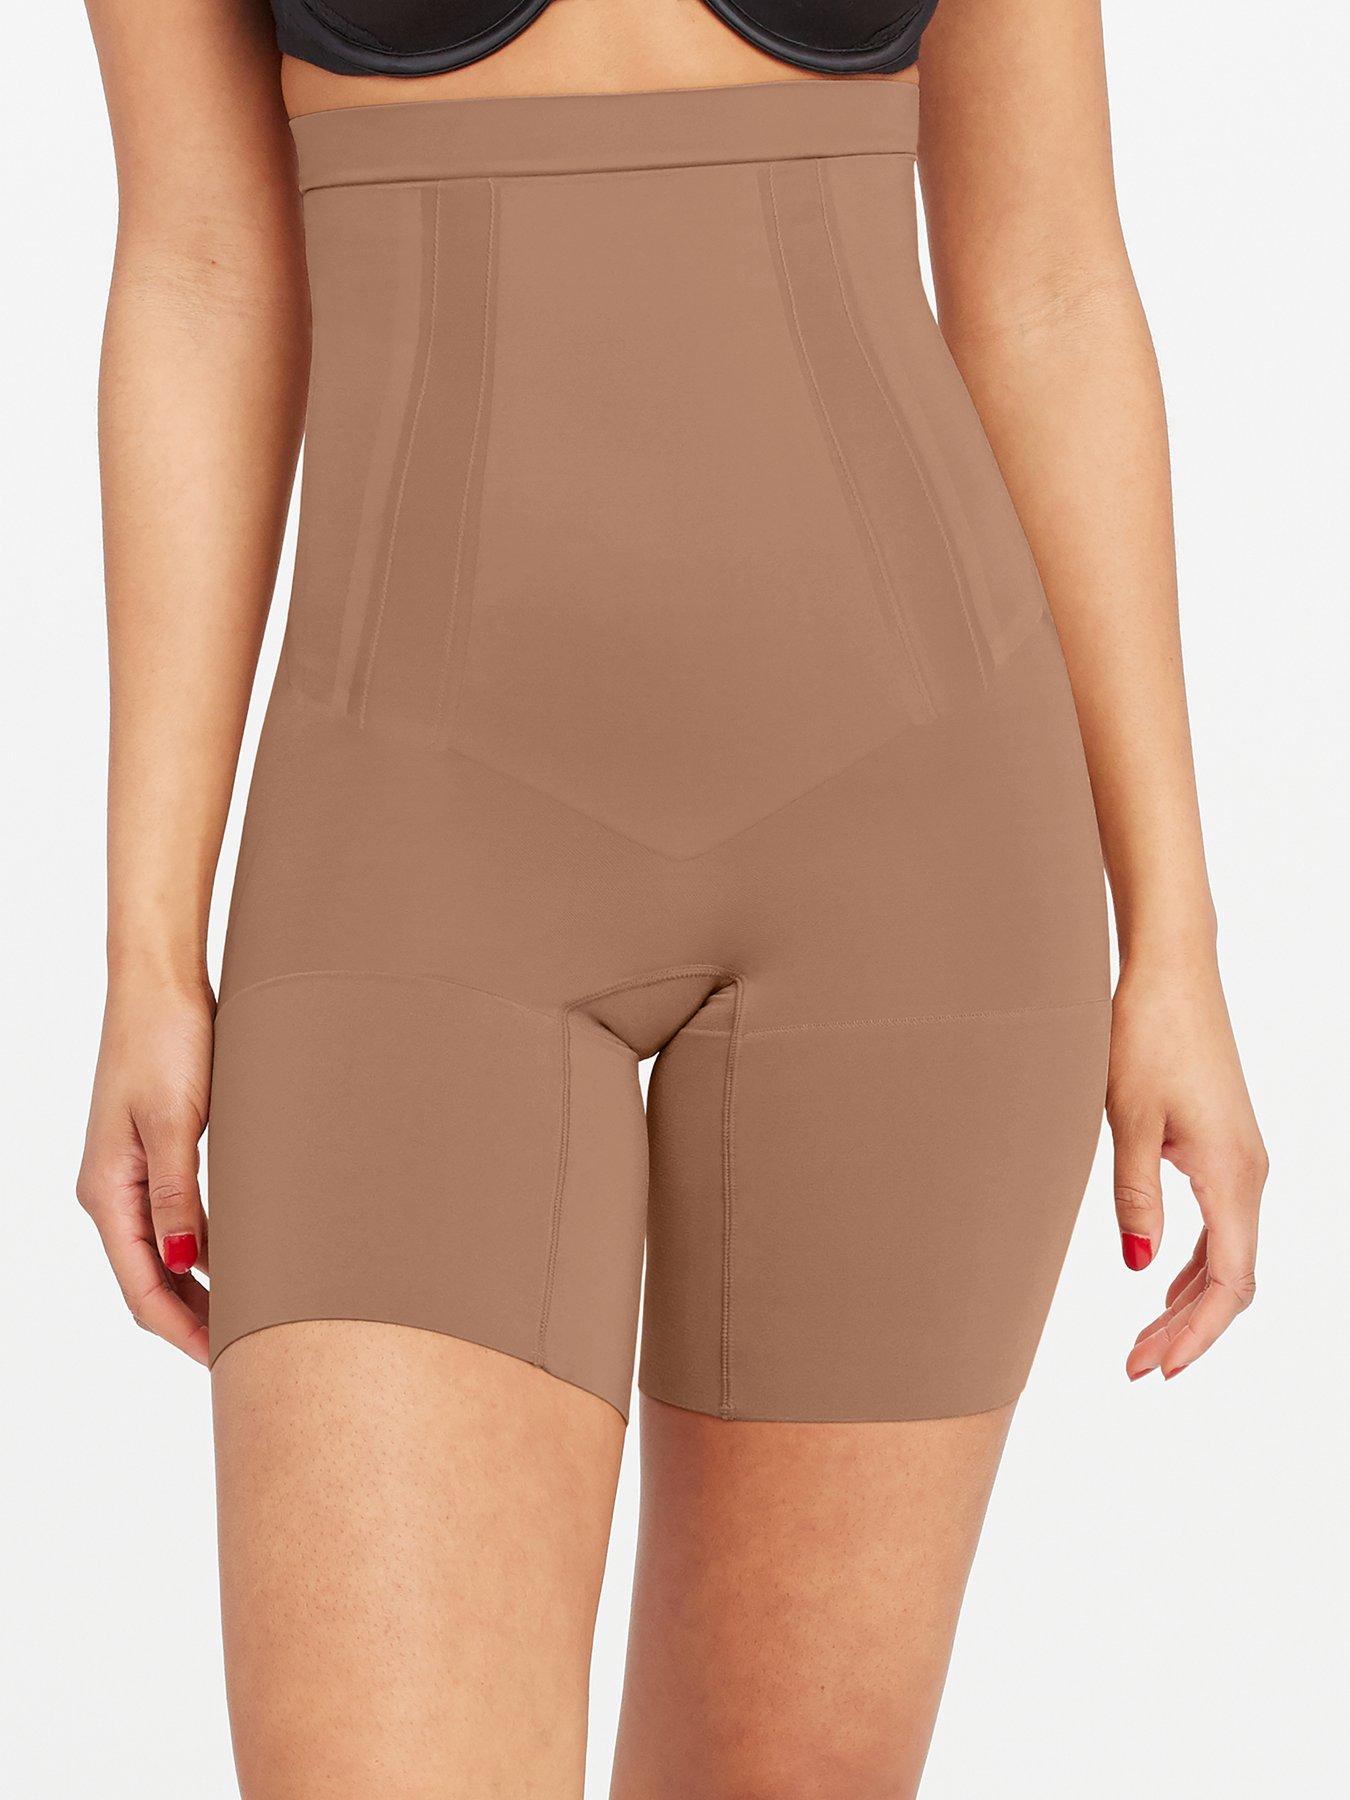 RED HOT by SPANX® Women's Mid-Thigh Shaper Super Control, Style 1840